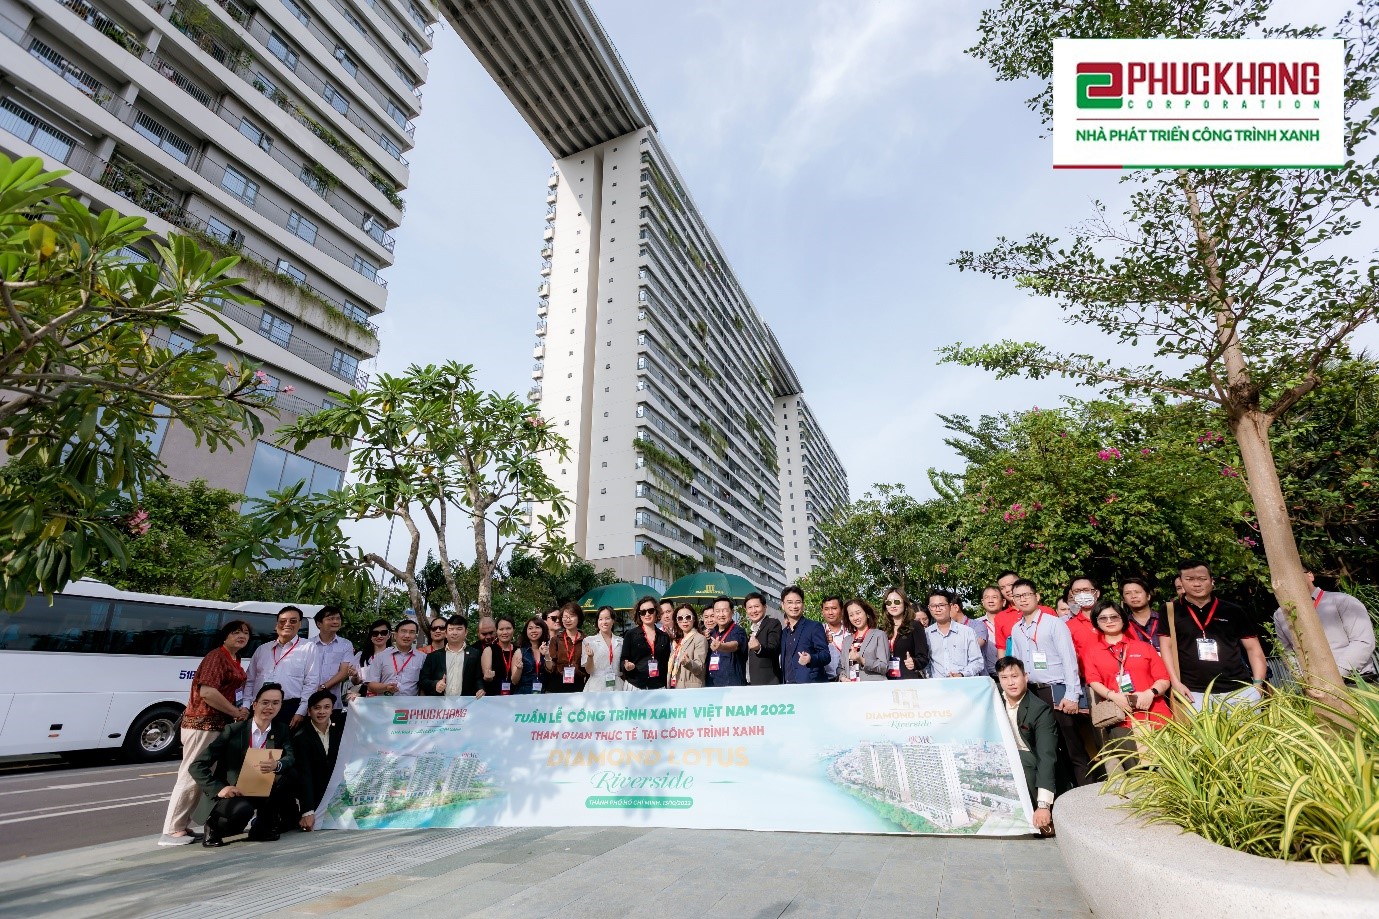 More than 60 representatives of ministries, agencies, organizations, associations, businesses, and the press... came to visit Diamond Lotus Riverside within the framework of Vietnam Green Building Week 2022